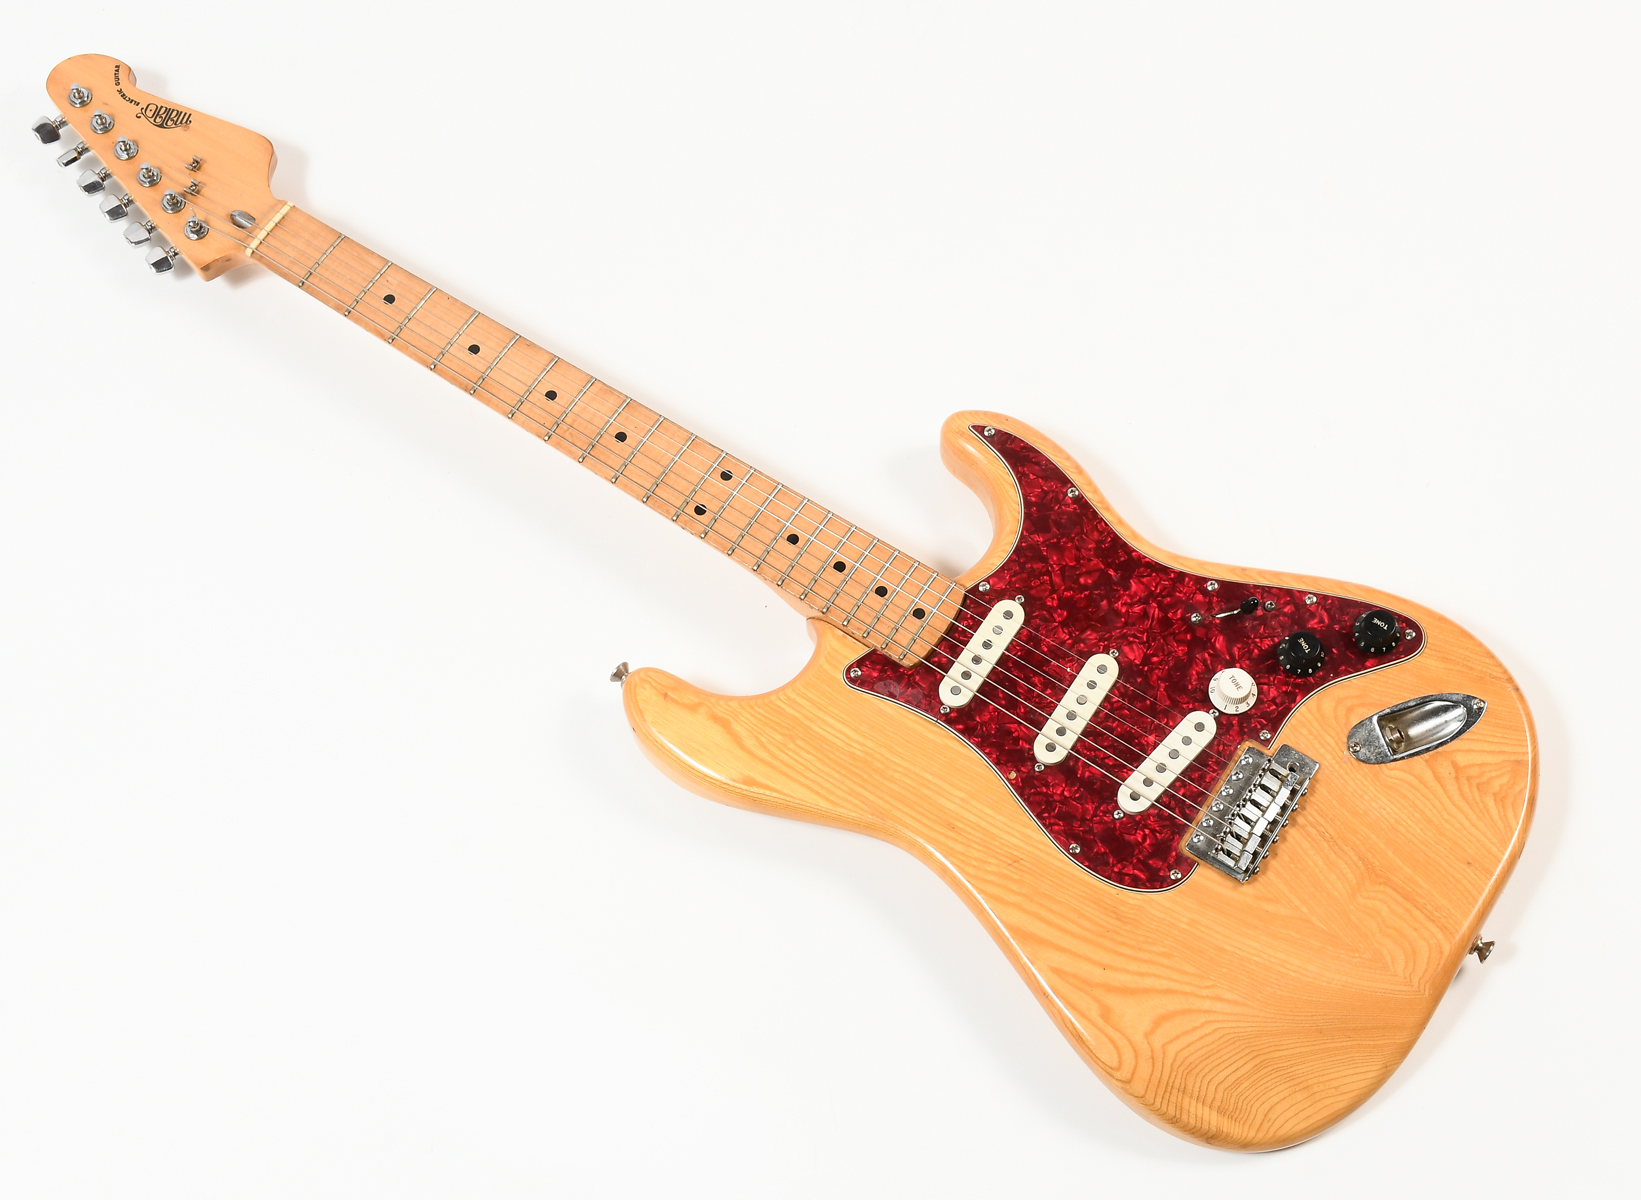 MATAO STRATOCASTER STYLE ELECTRIC